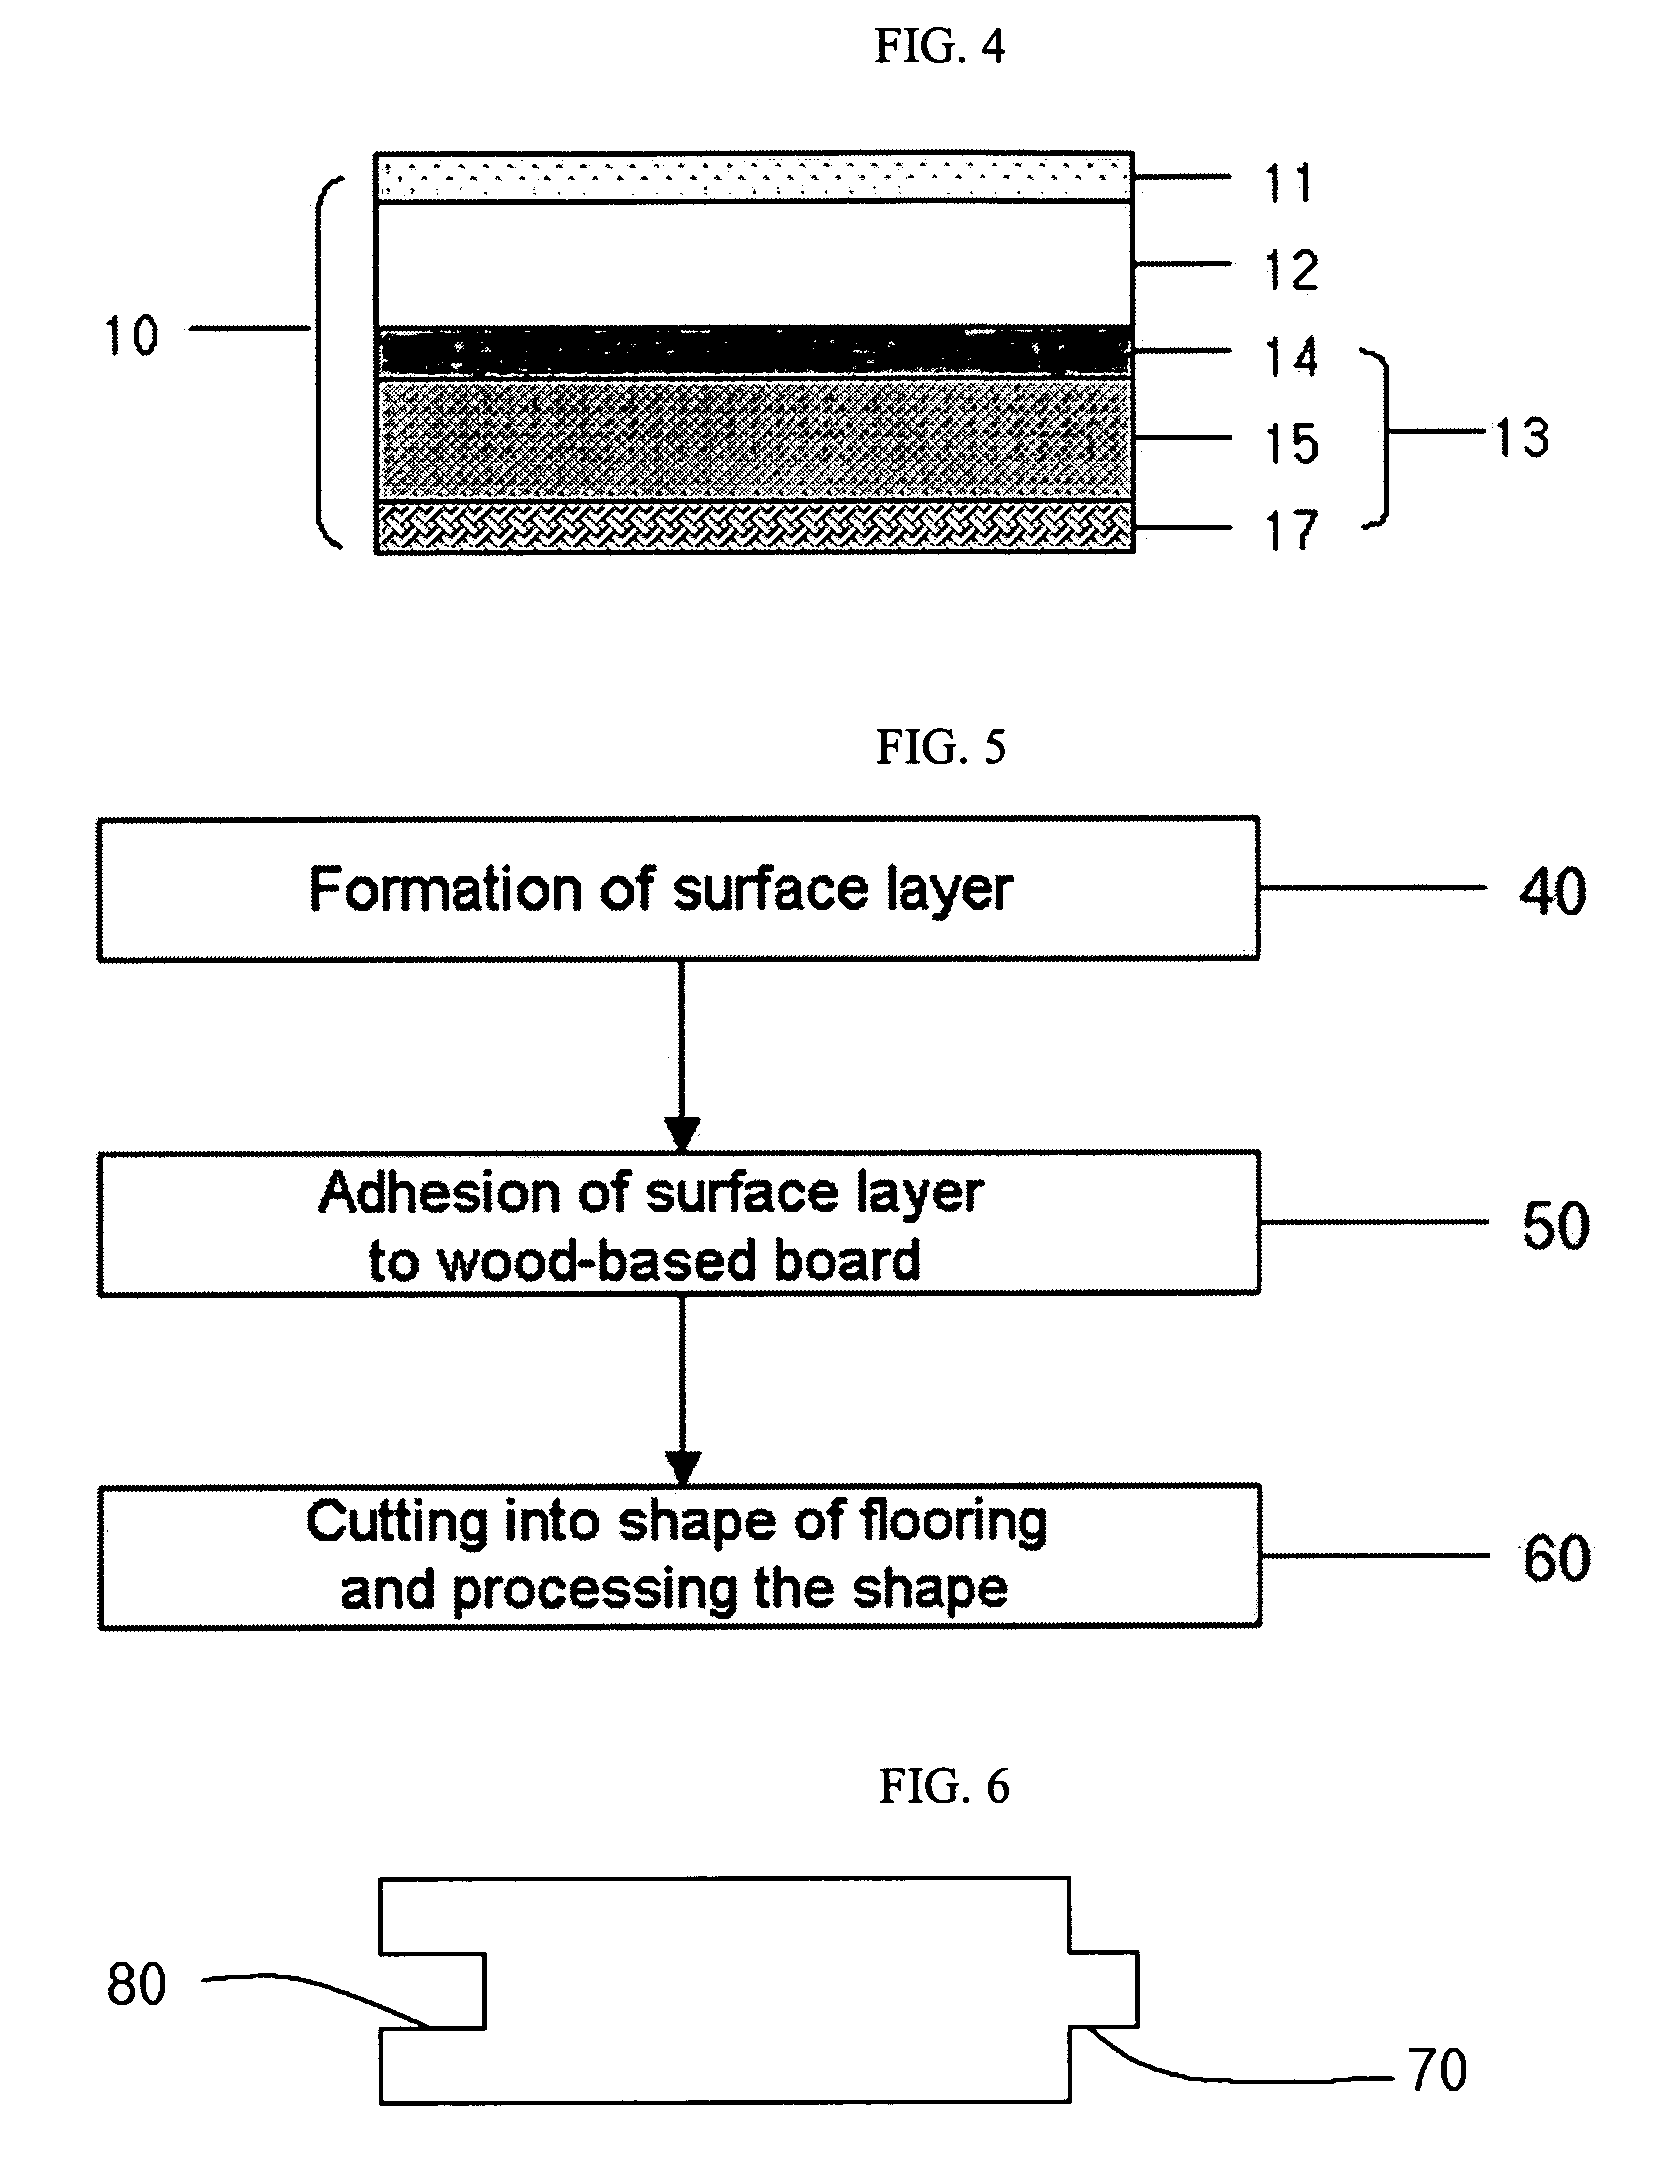 Flooring having surface layer of synthetic resin and wood-based board